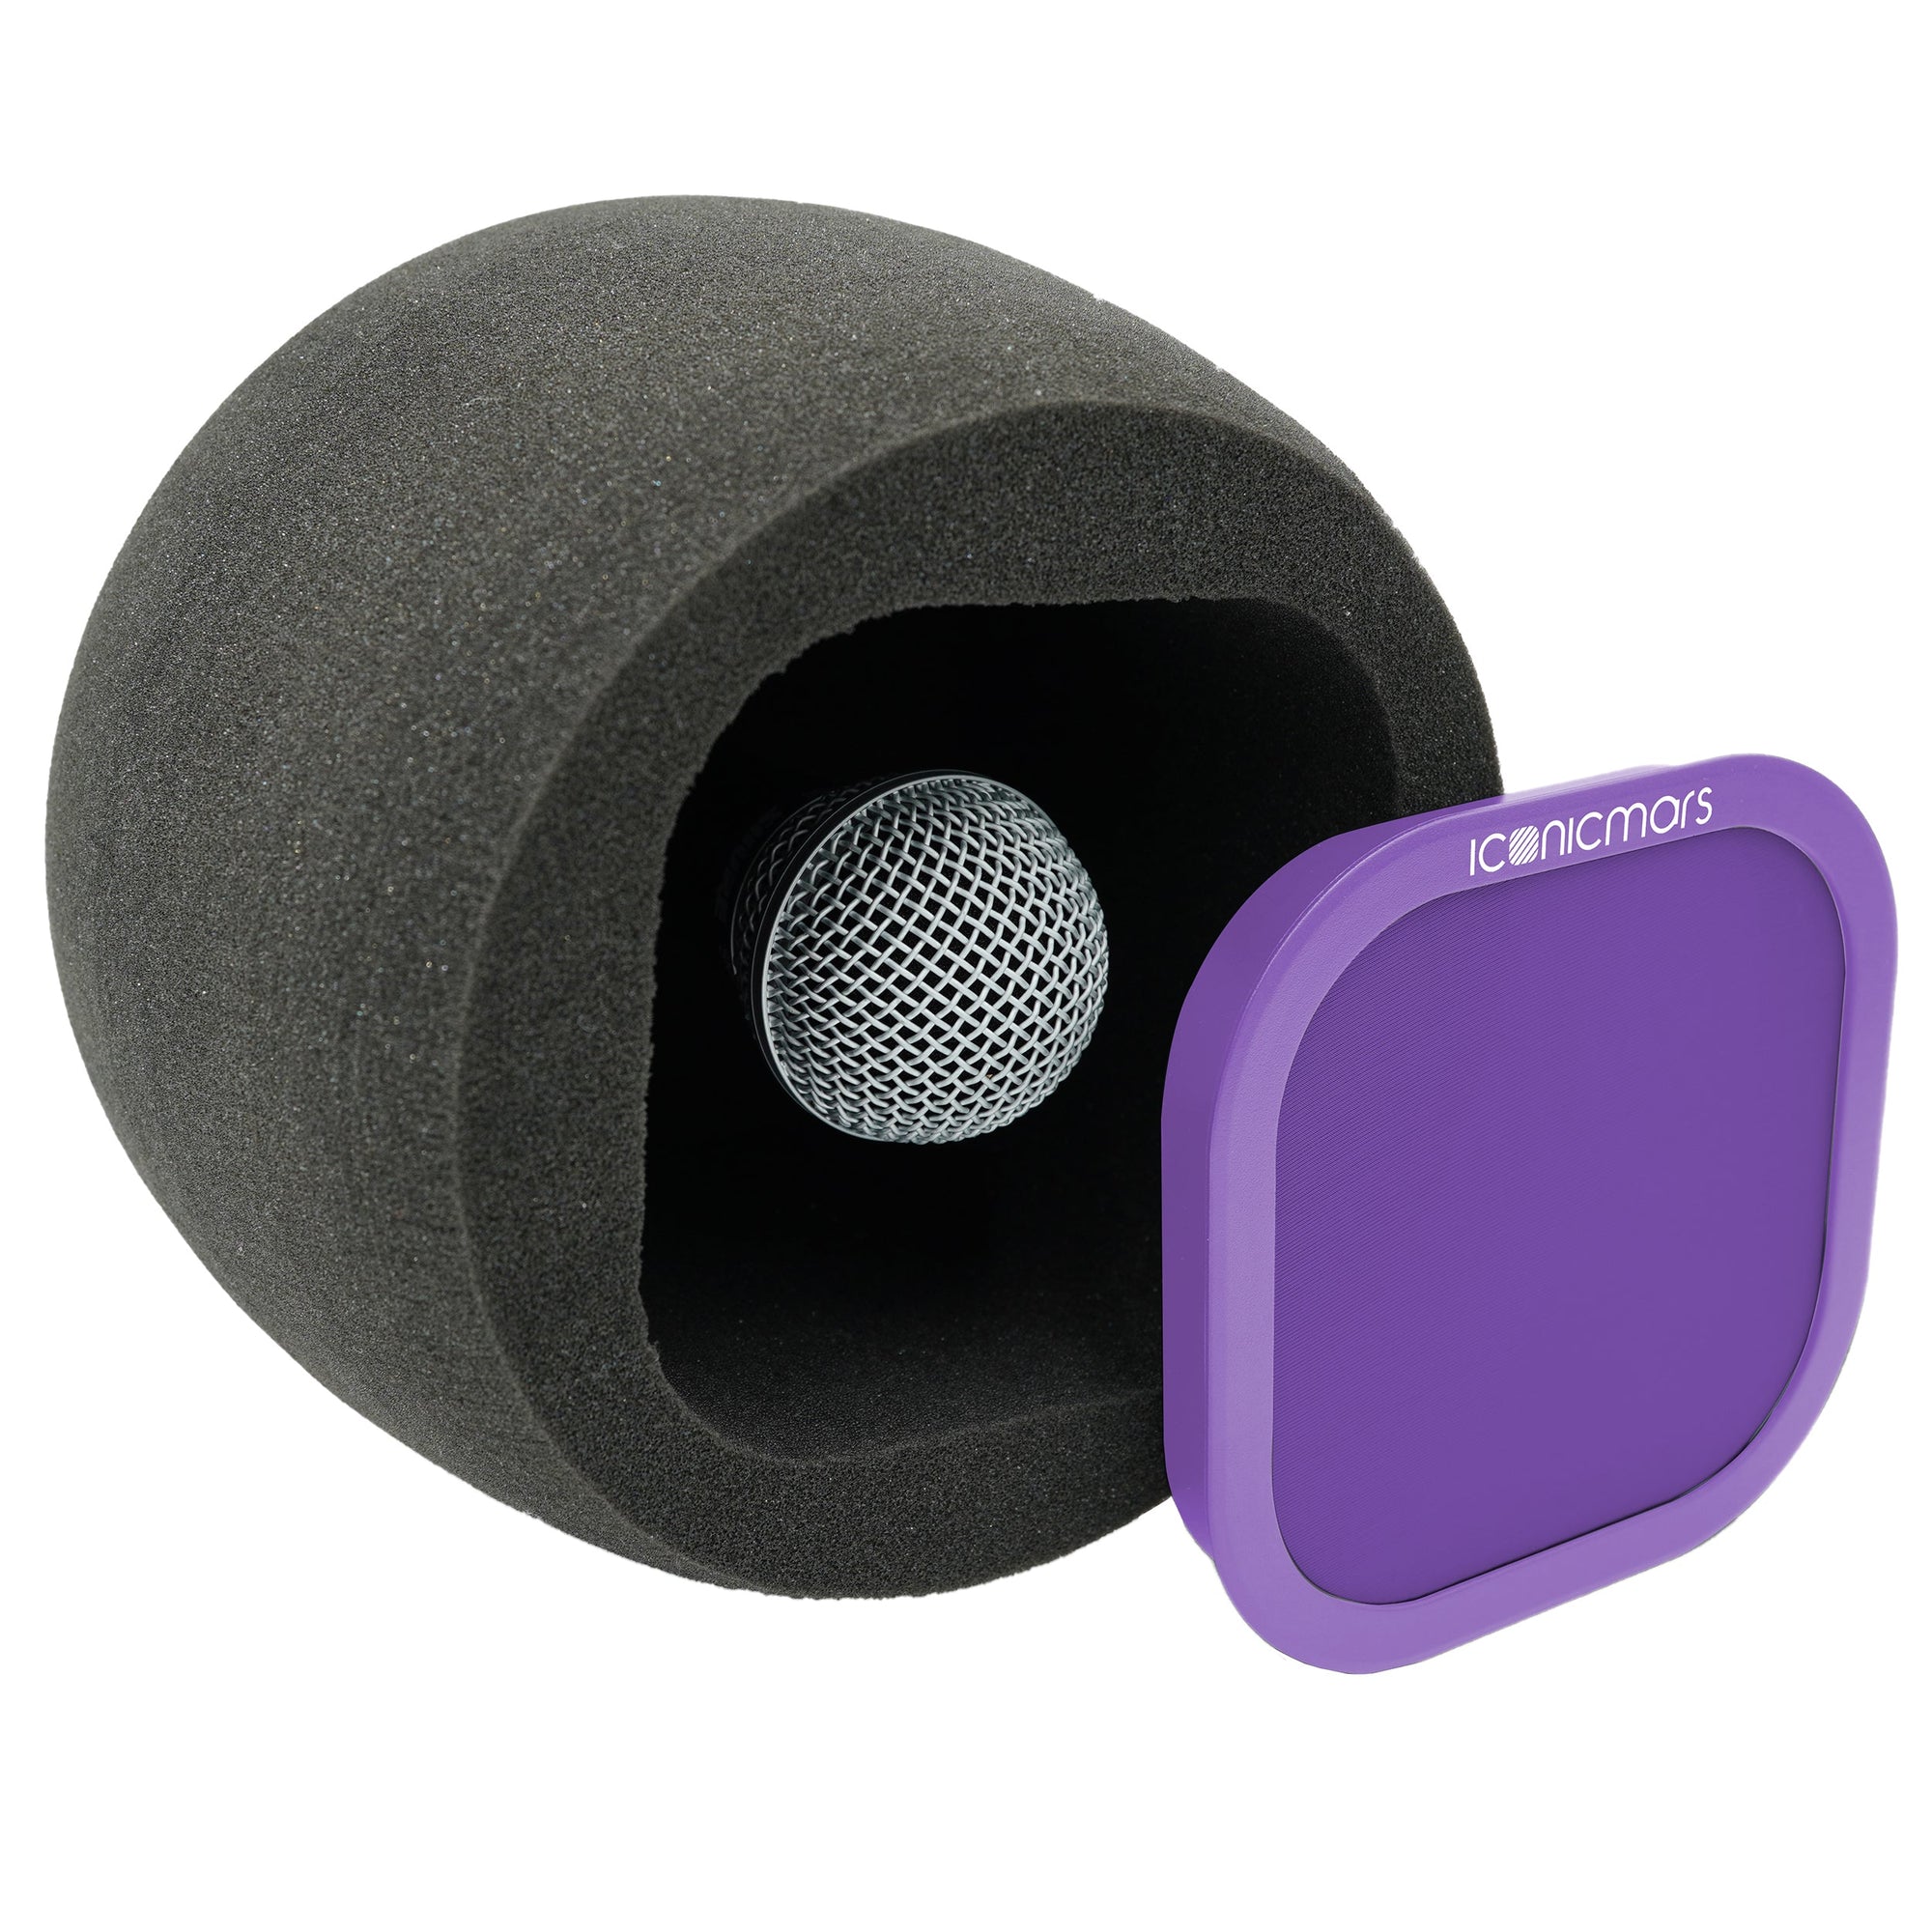 Comet X7A side view with pop filter off showing mic chamber, eyeball like design for front facing micrphone  -- Purple Berry